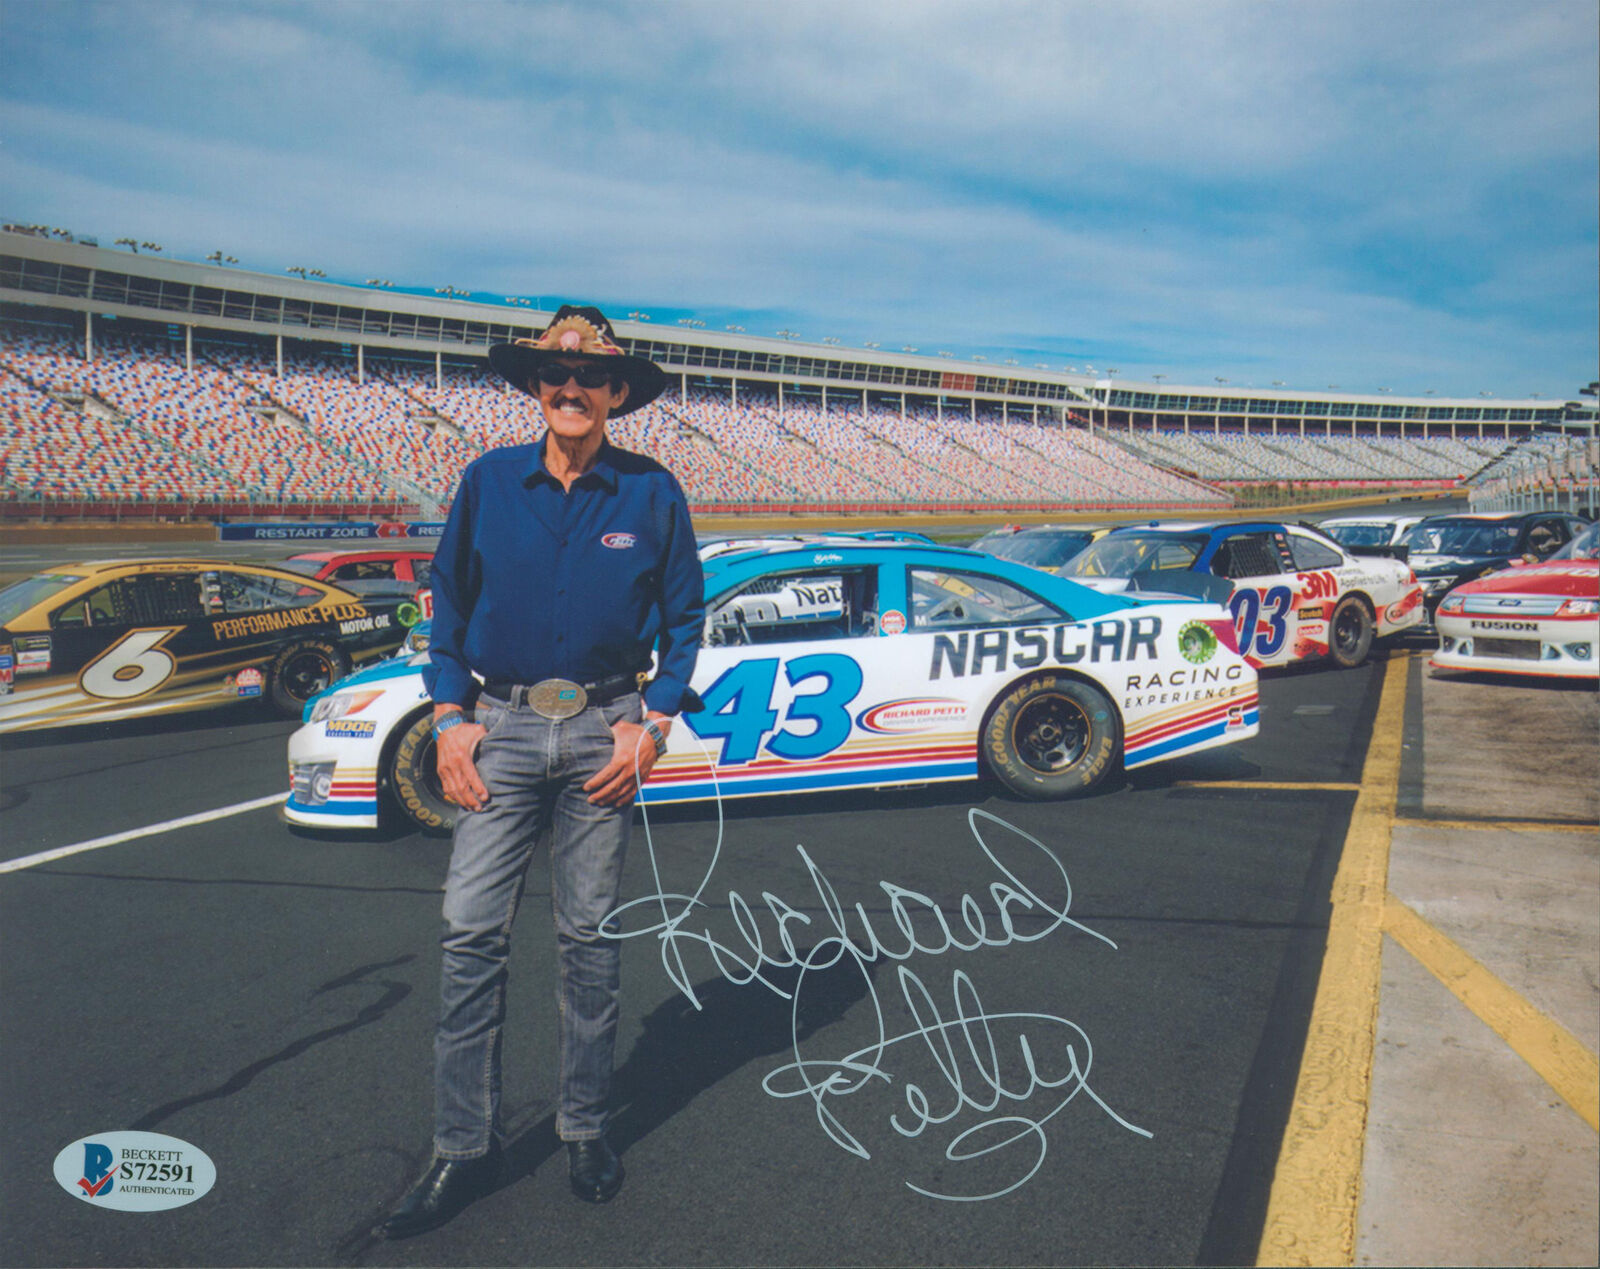 NASCAR Richard Petty Authentic Signed 8x10 Photo Poster painting Autographed BAS #S72591